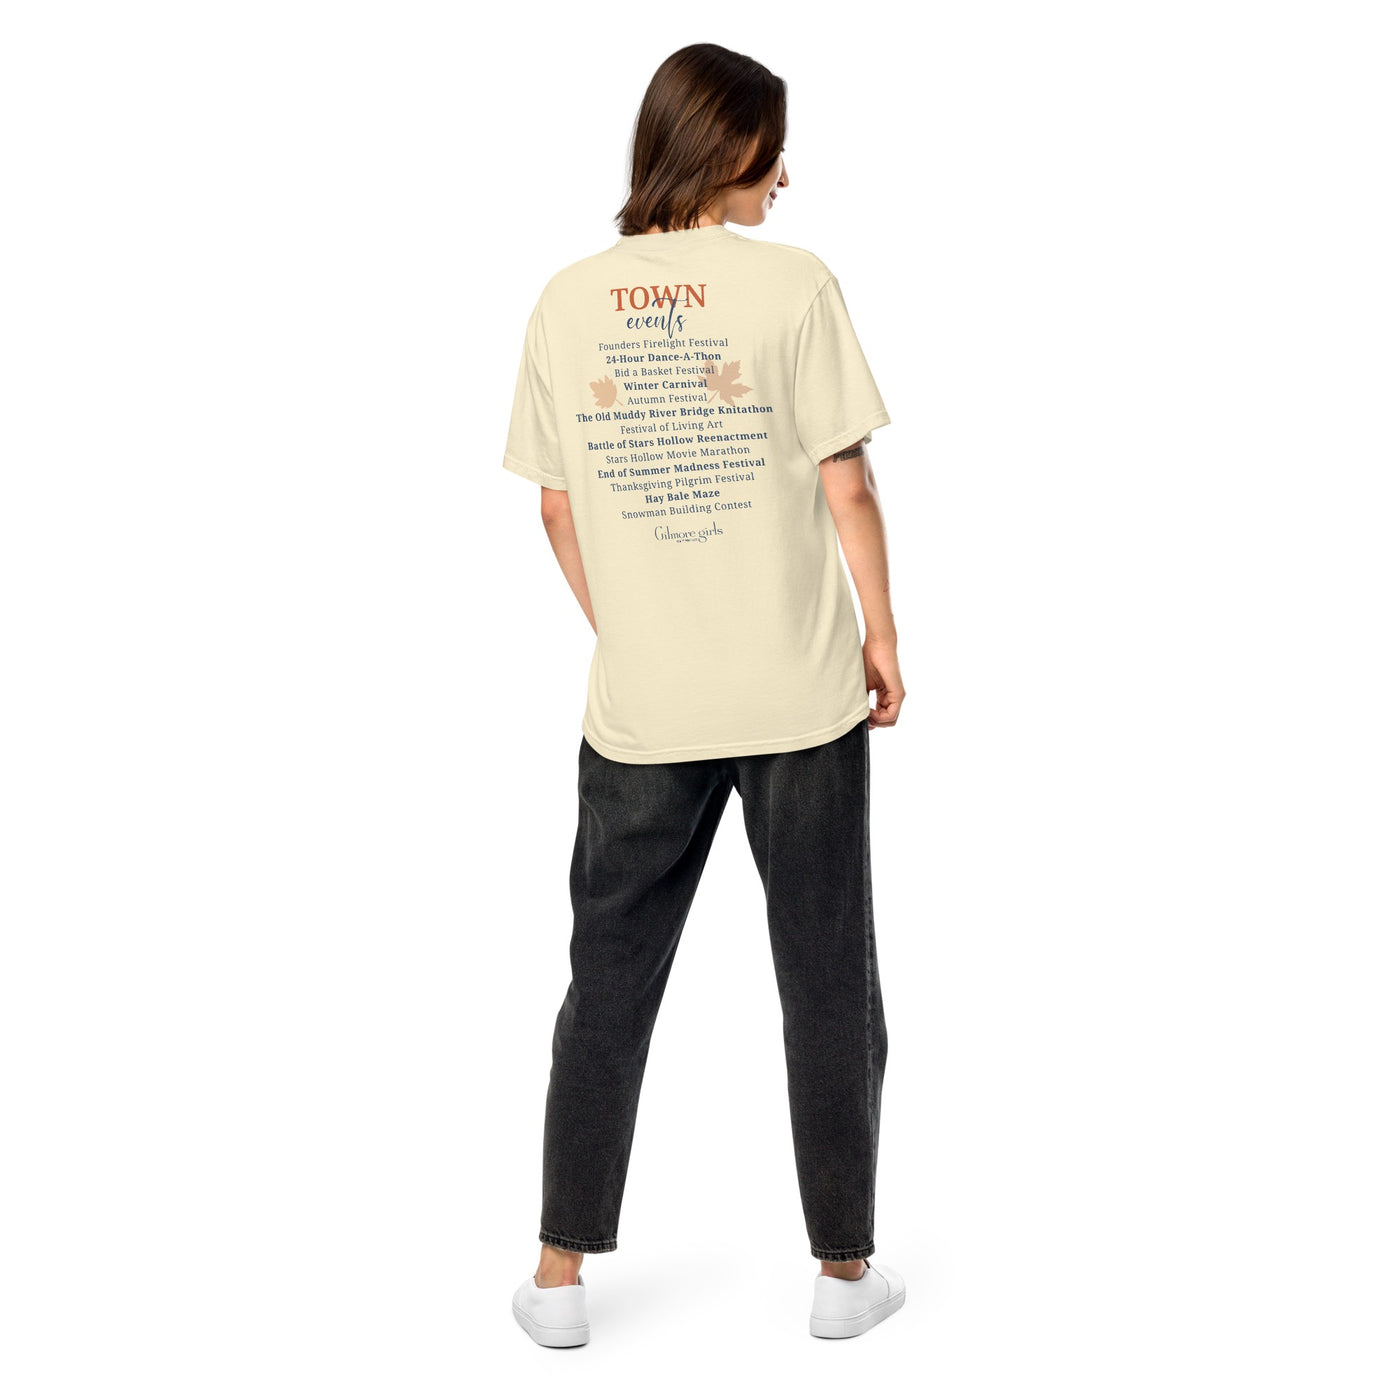 Gilmore Girls Town Events Comfort Colors Adult T-Shirt